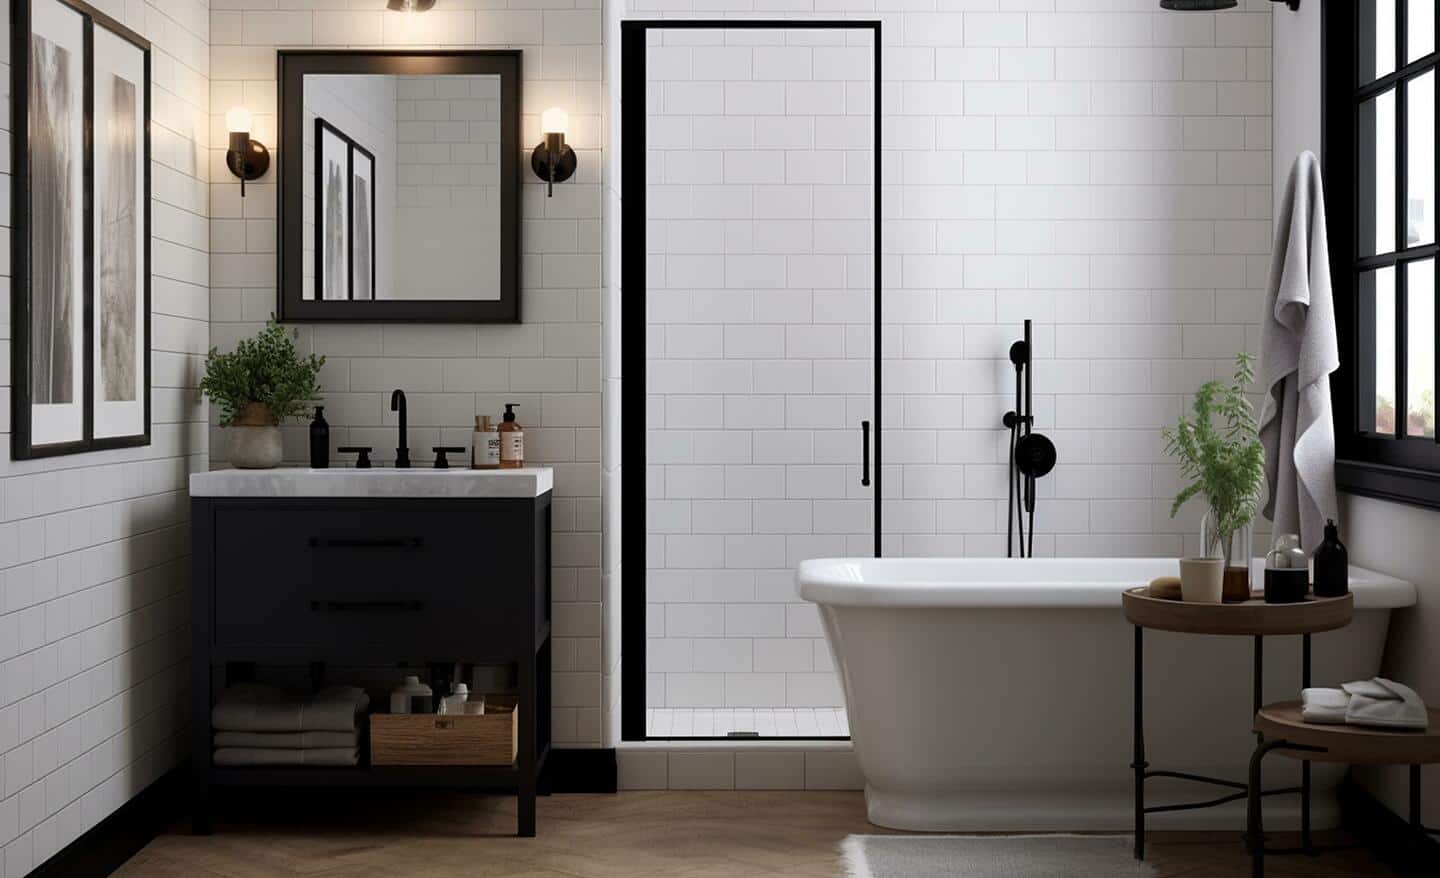 White subway tile and black shower doors installed in a modern bathroom.